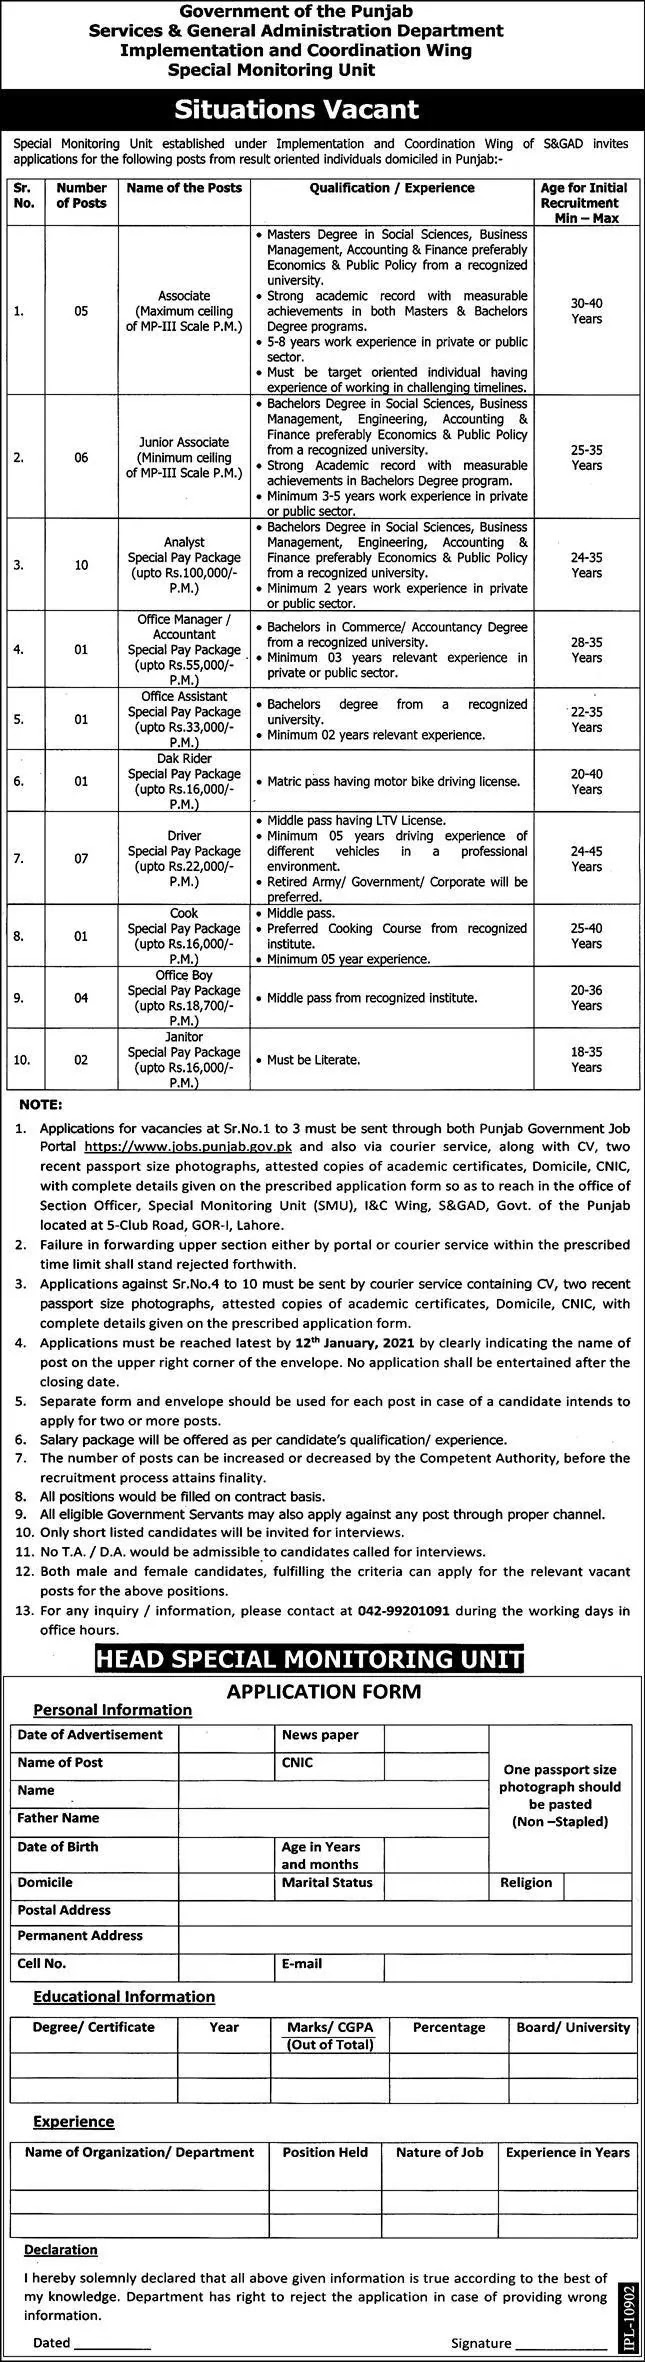 Services and General Administration Department Jobs 2021